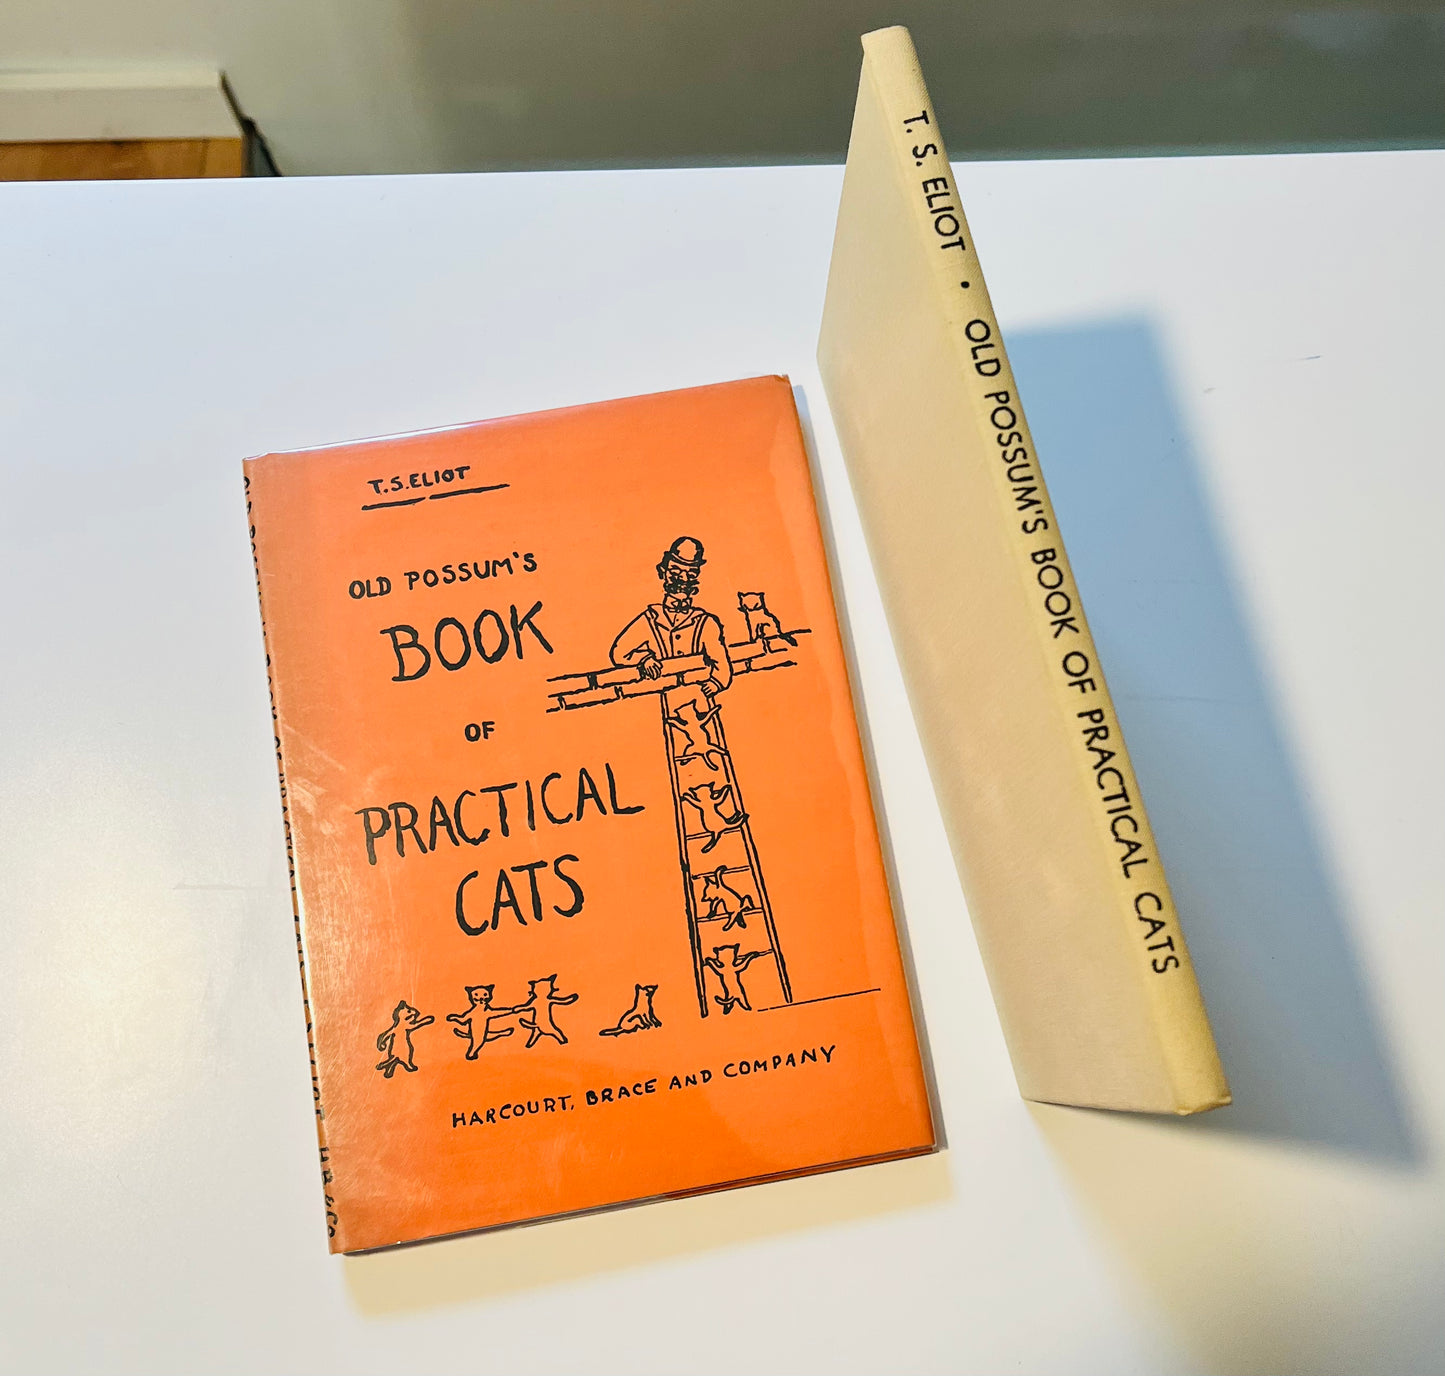 Old Possom's Book of Practical Cats